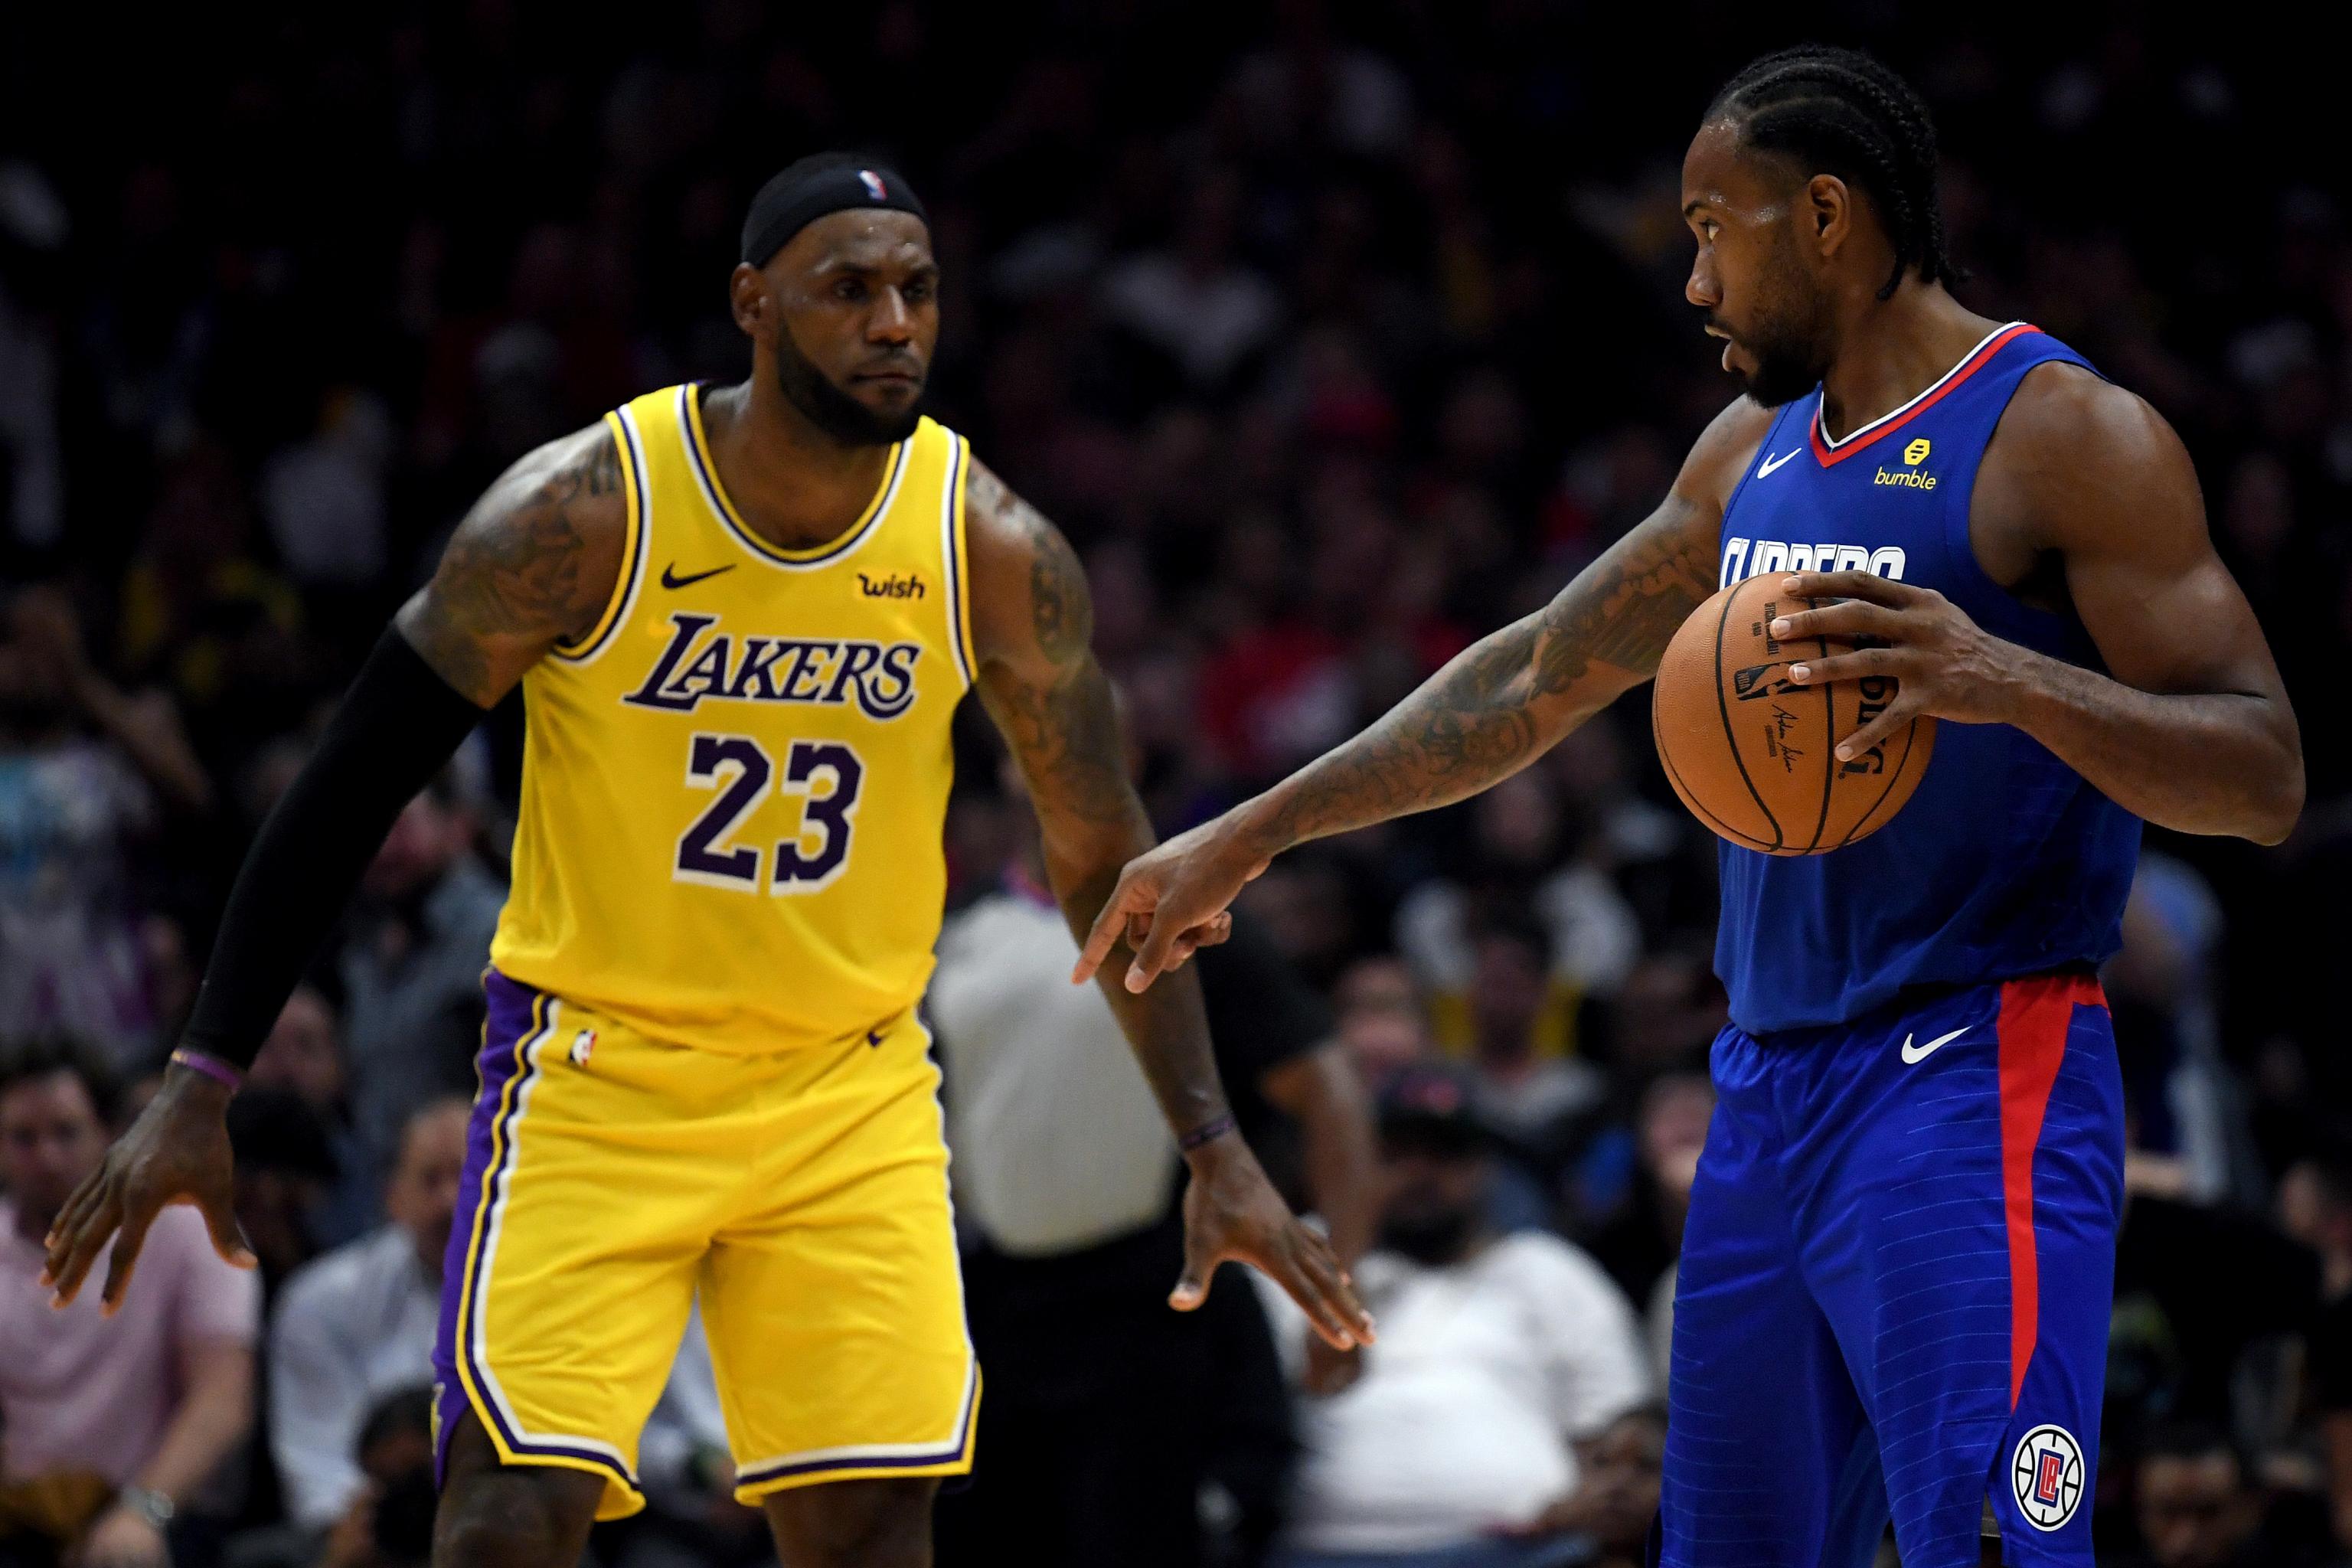 Kawhi Leonard Clippers Lakers Christmas Game Is Different Matchup From Opener Bleacher Report Latest News Videos And Highlights